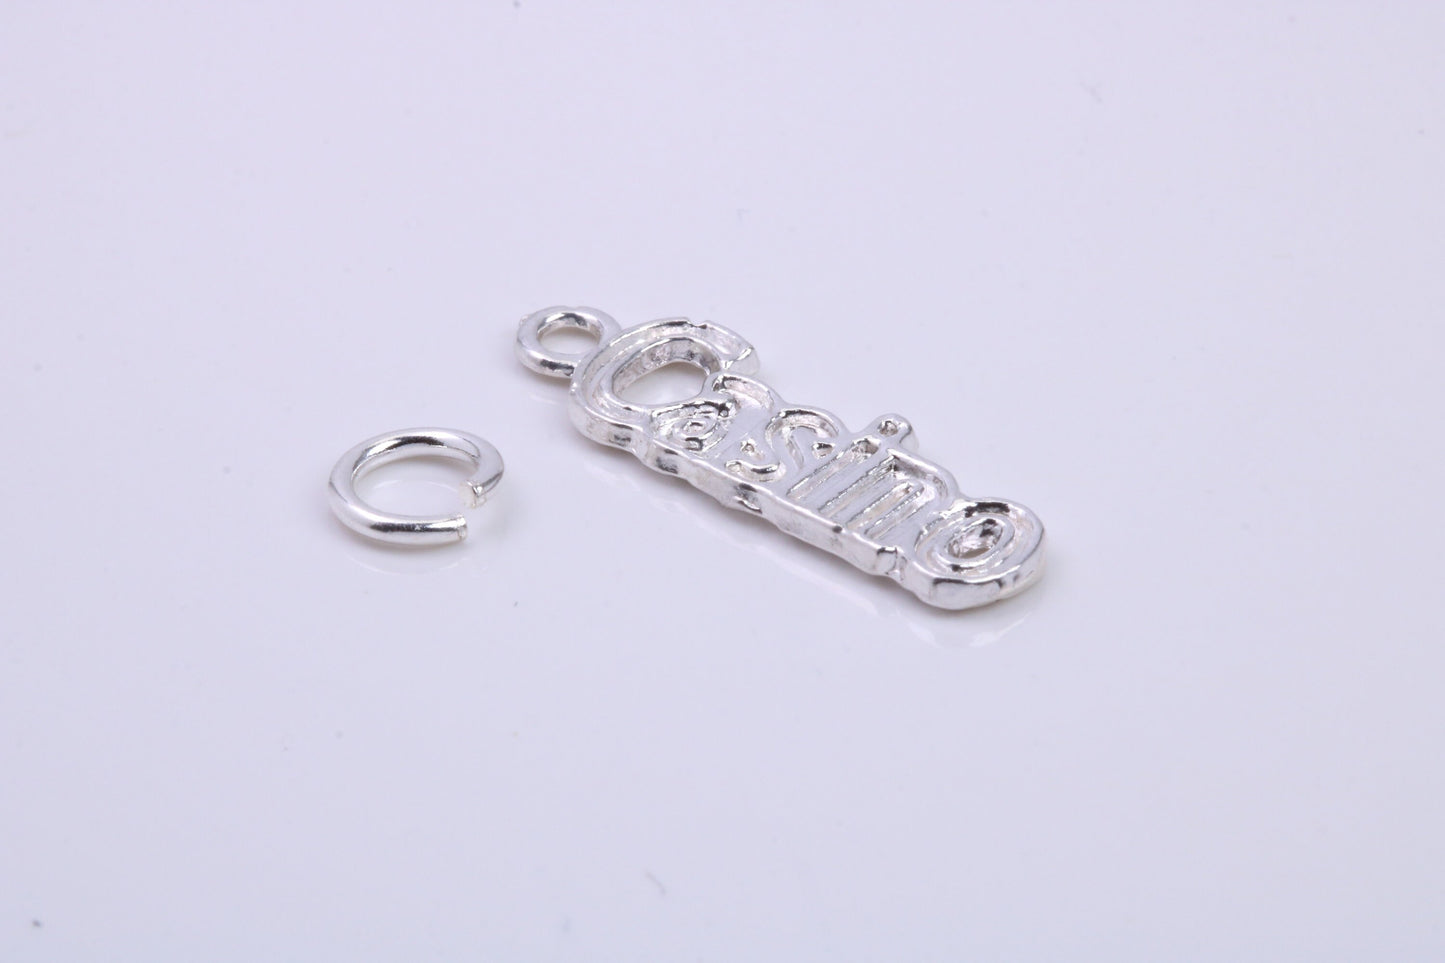 Casino Charm, Traditional Charm, Made from Solid 925 Grade Sterling Silver, Complete with Attachment Link